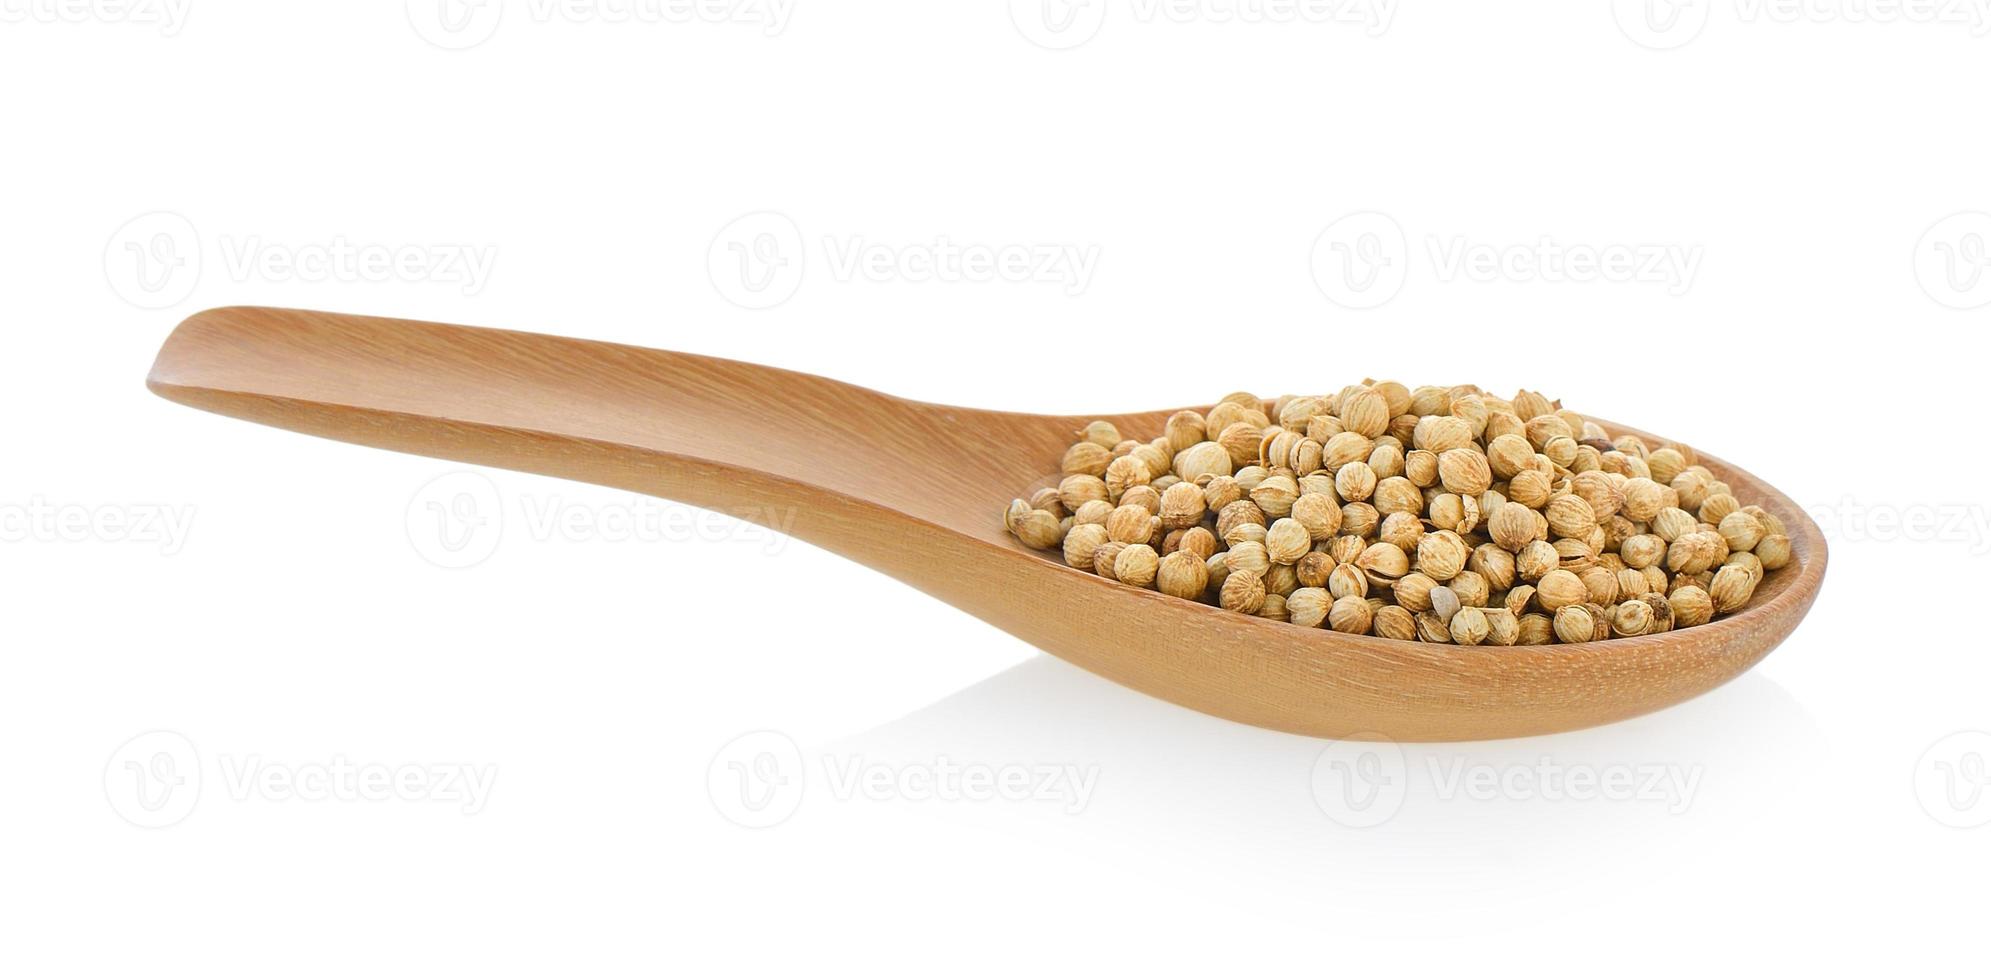 Coriander seeds in wood spoon on white background photo